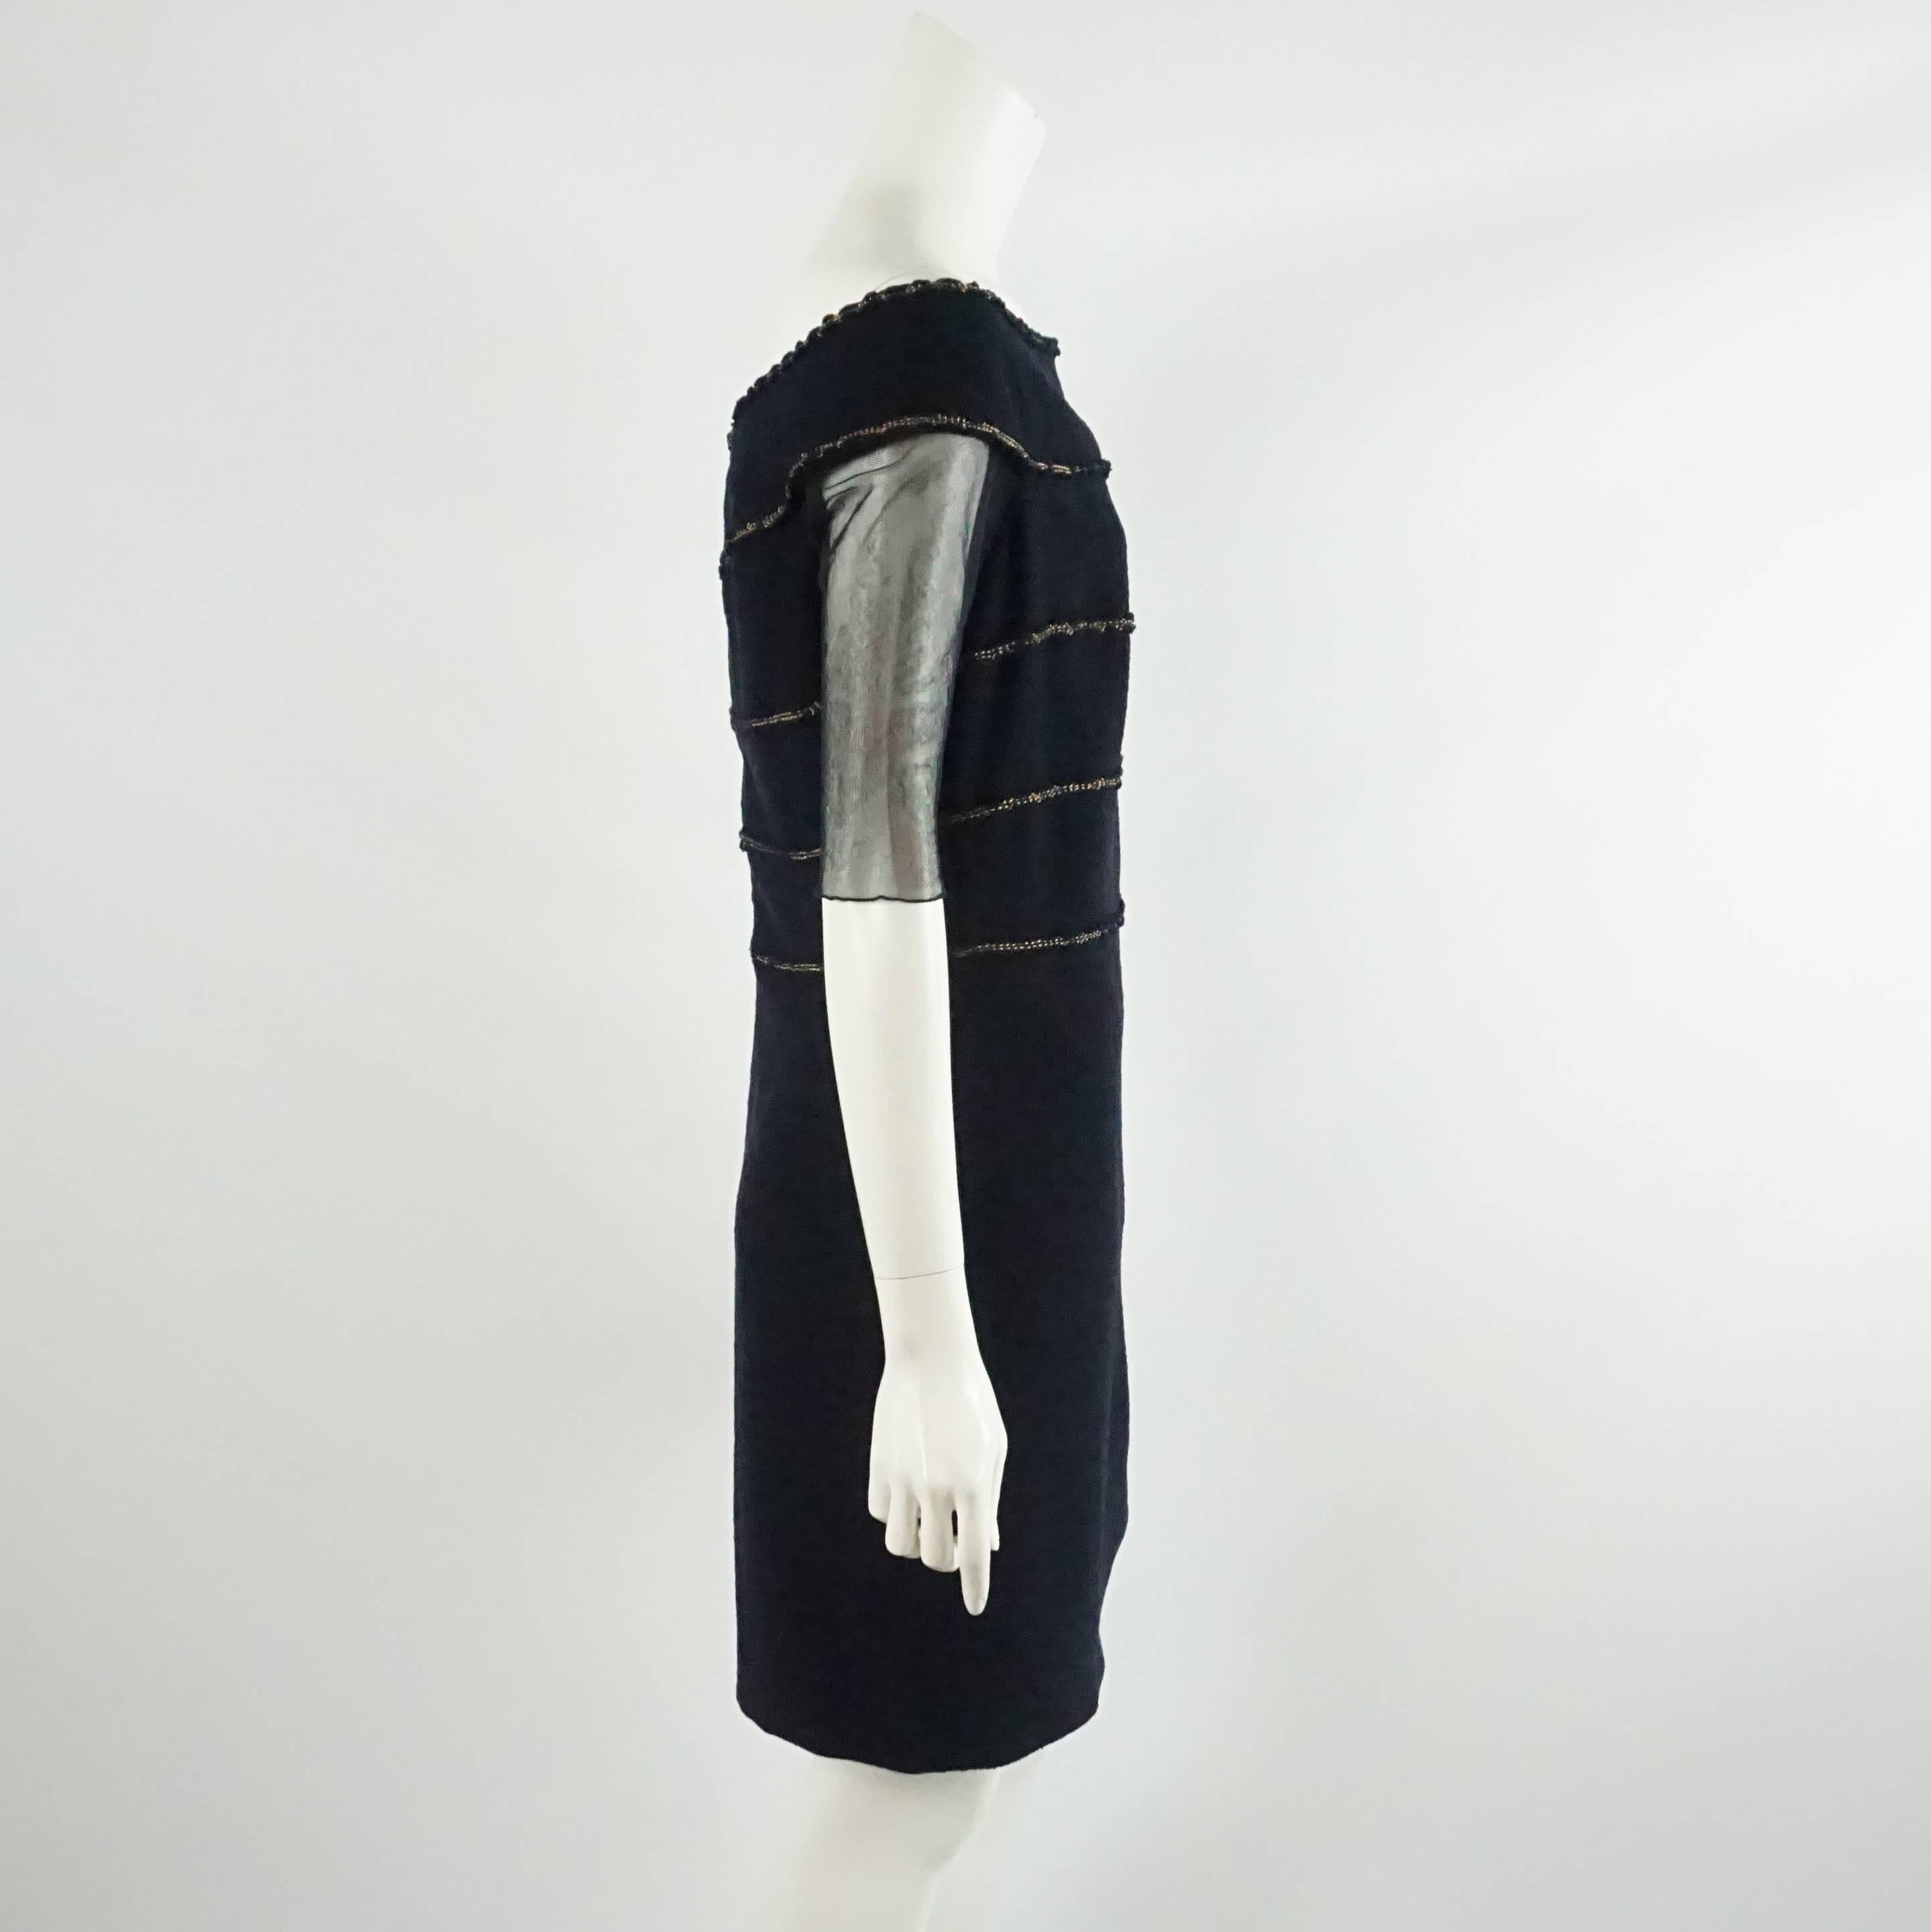 This Chanel navy wool dress has gold threaded detail on the bodice and slight ruching on the left hip. The dress has a boat neck and elbow length mesh sleeves. It is excellent condition with light wear to the wool.

Measurements
Bust: 38